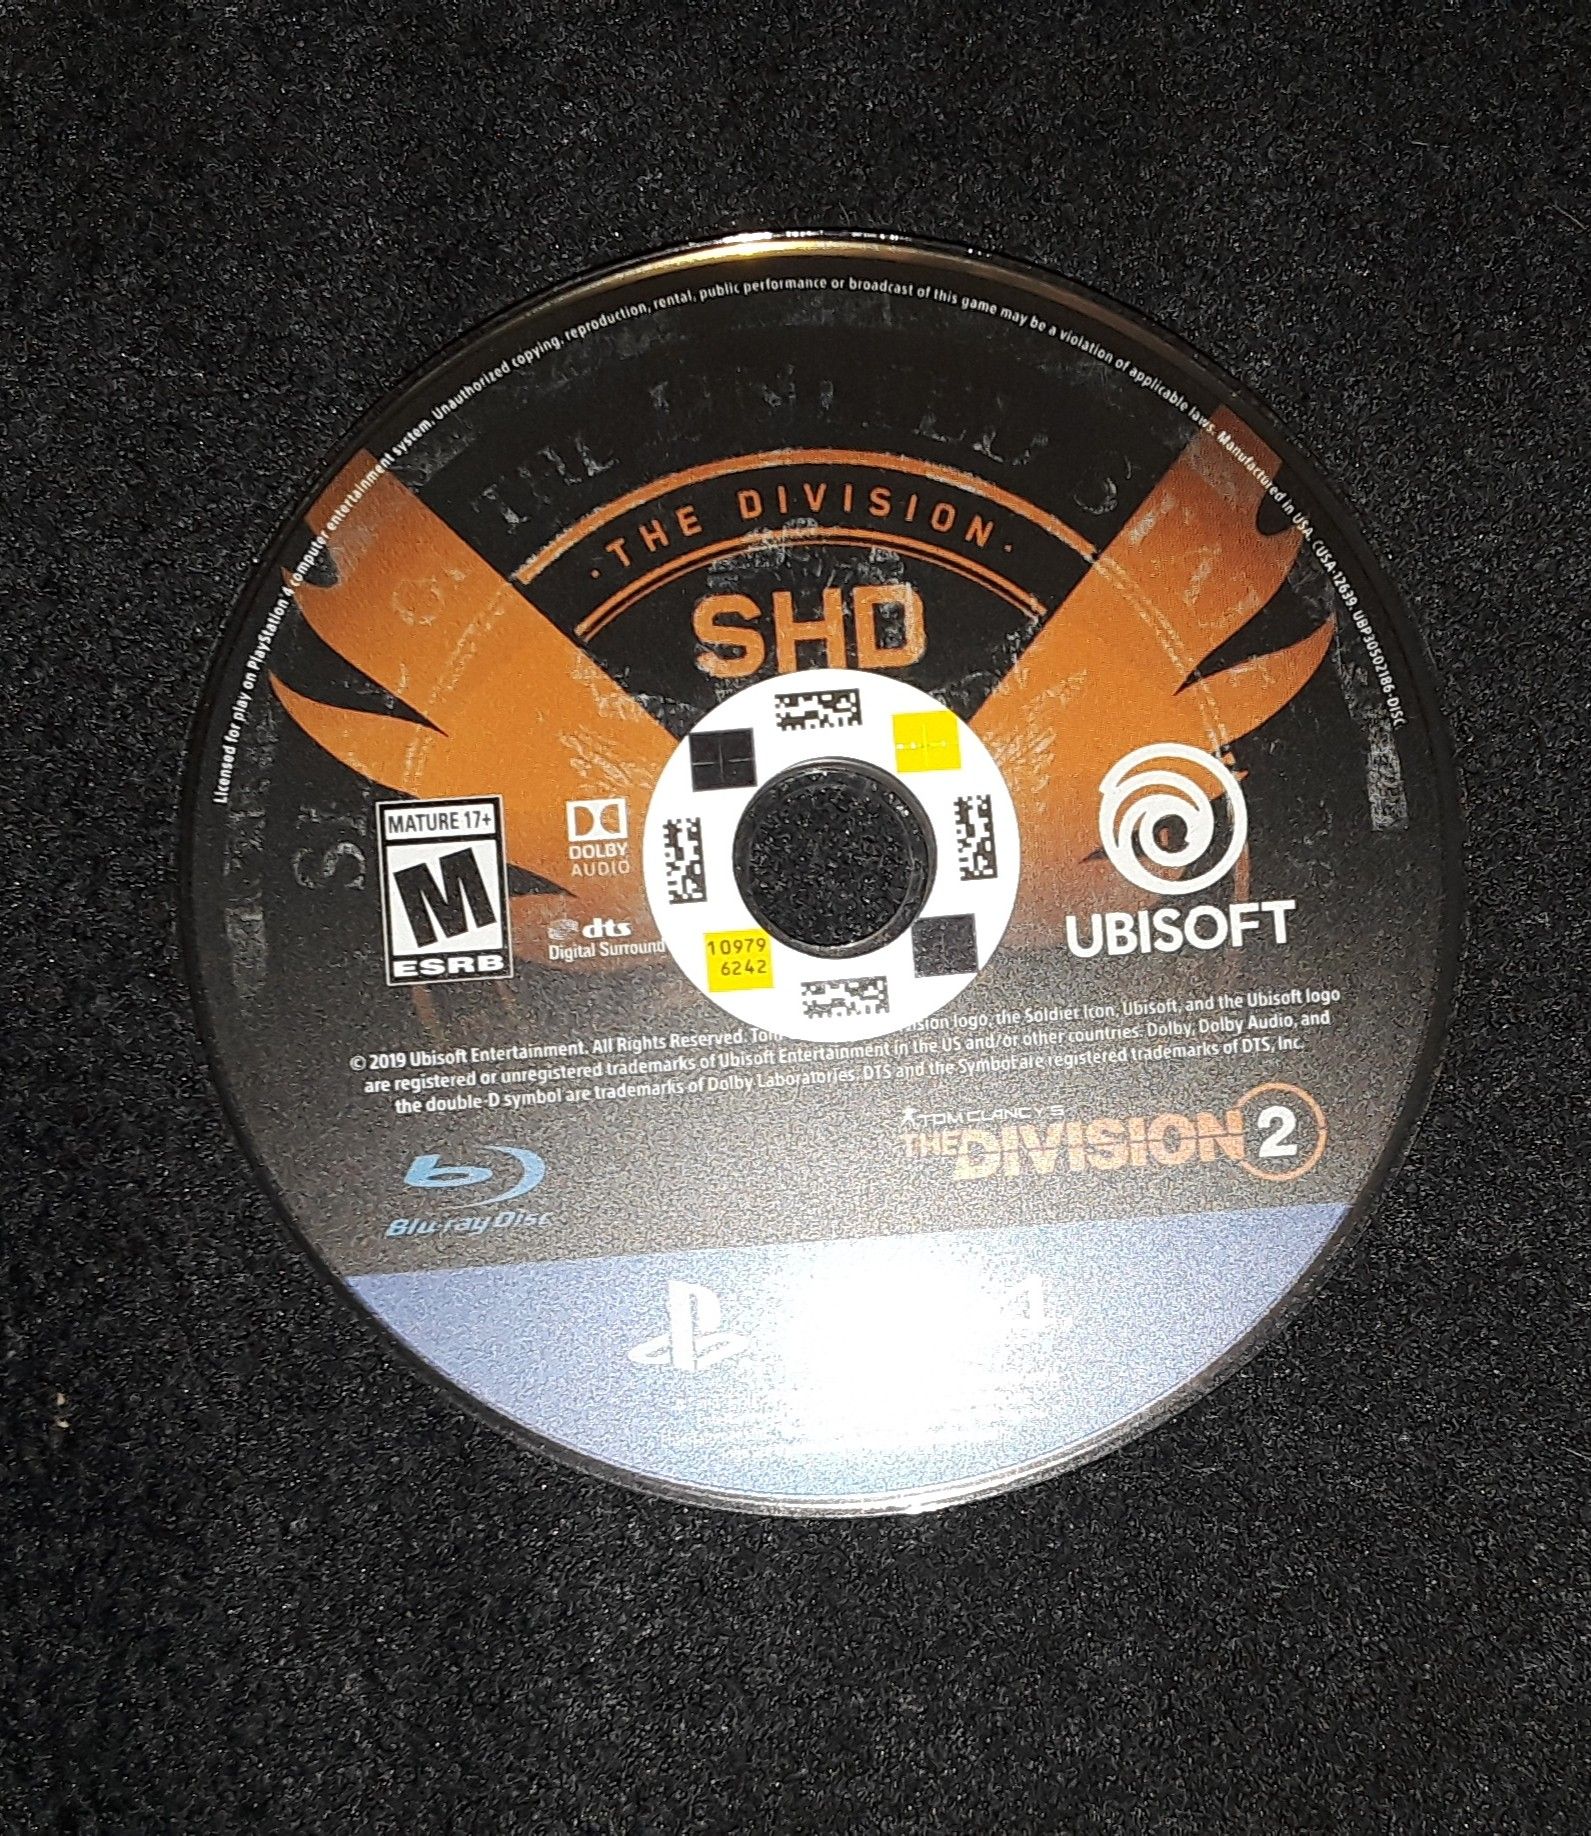 Tom Clancy's: The Division 2 (PS4 game disc only)